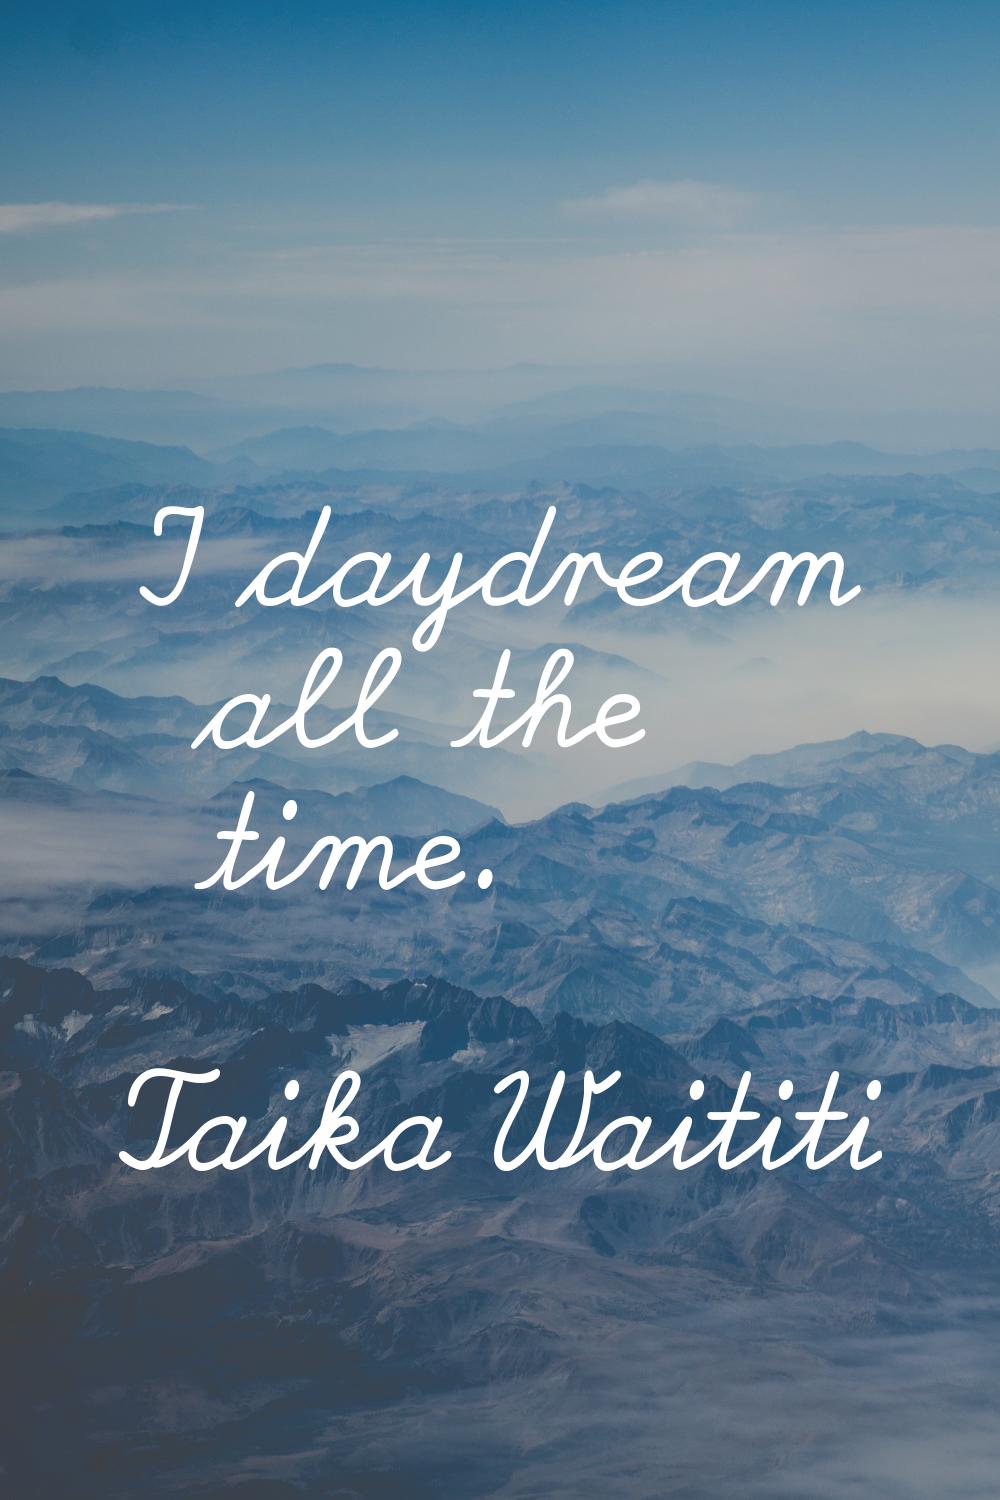 I daydream all the time.